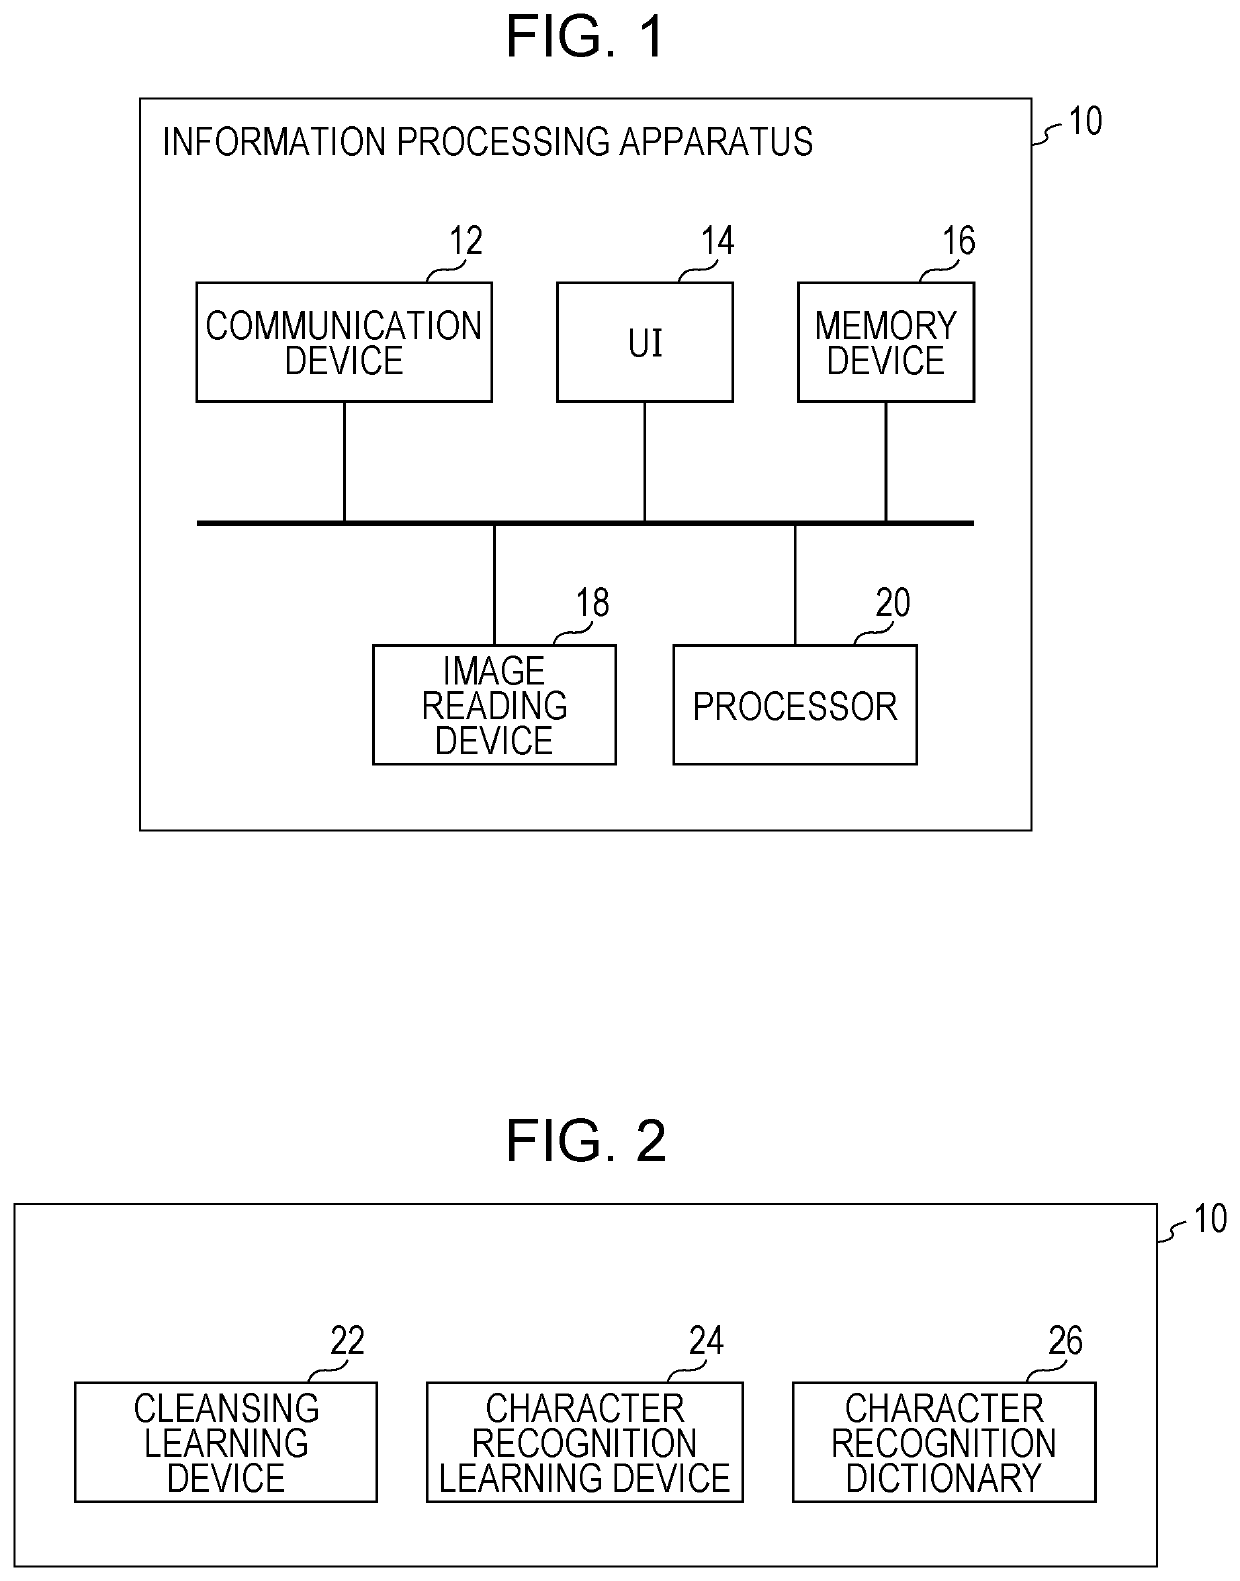 Information processing apparatus and non-transitory computer readable medium